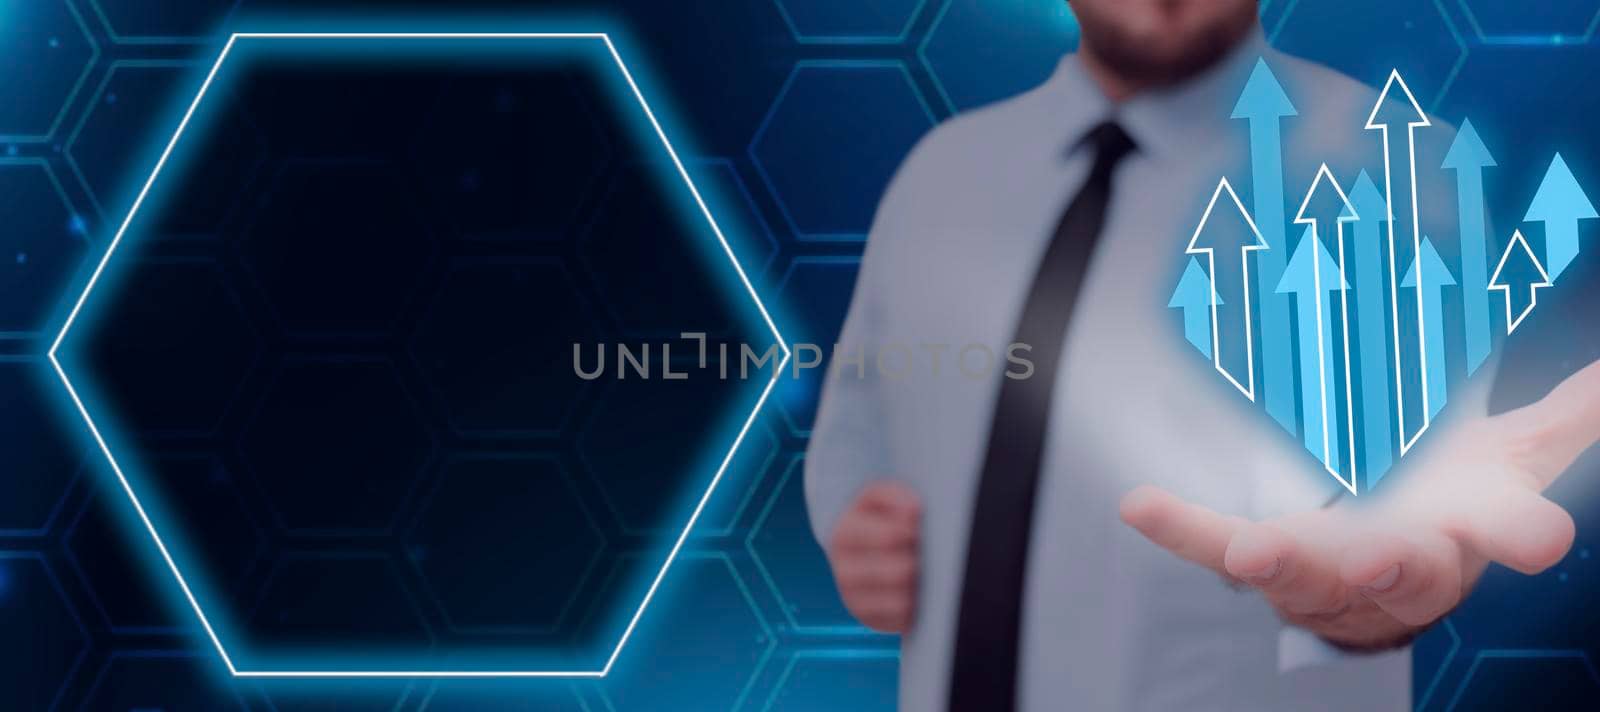 Businessman Reaching Out A Glowing Hand In A Futuristic Design With Arrows Going Up. Man In Necktie Showing Crucial Information And New Concepts In A Presentation. by nialowwa